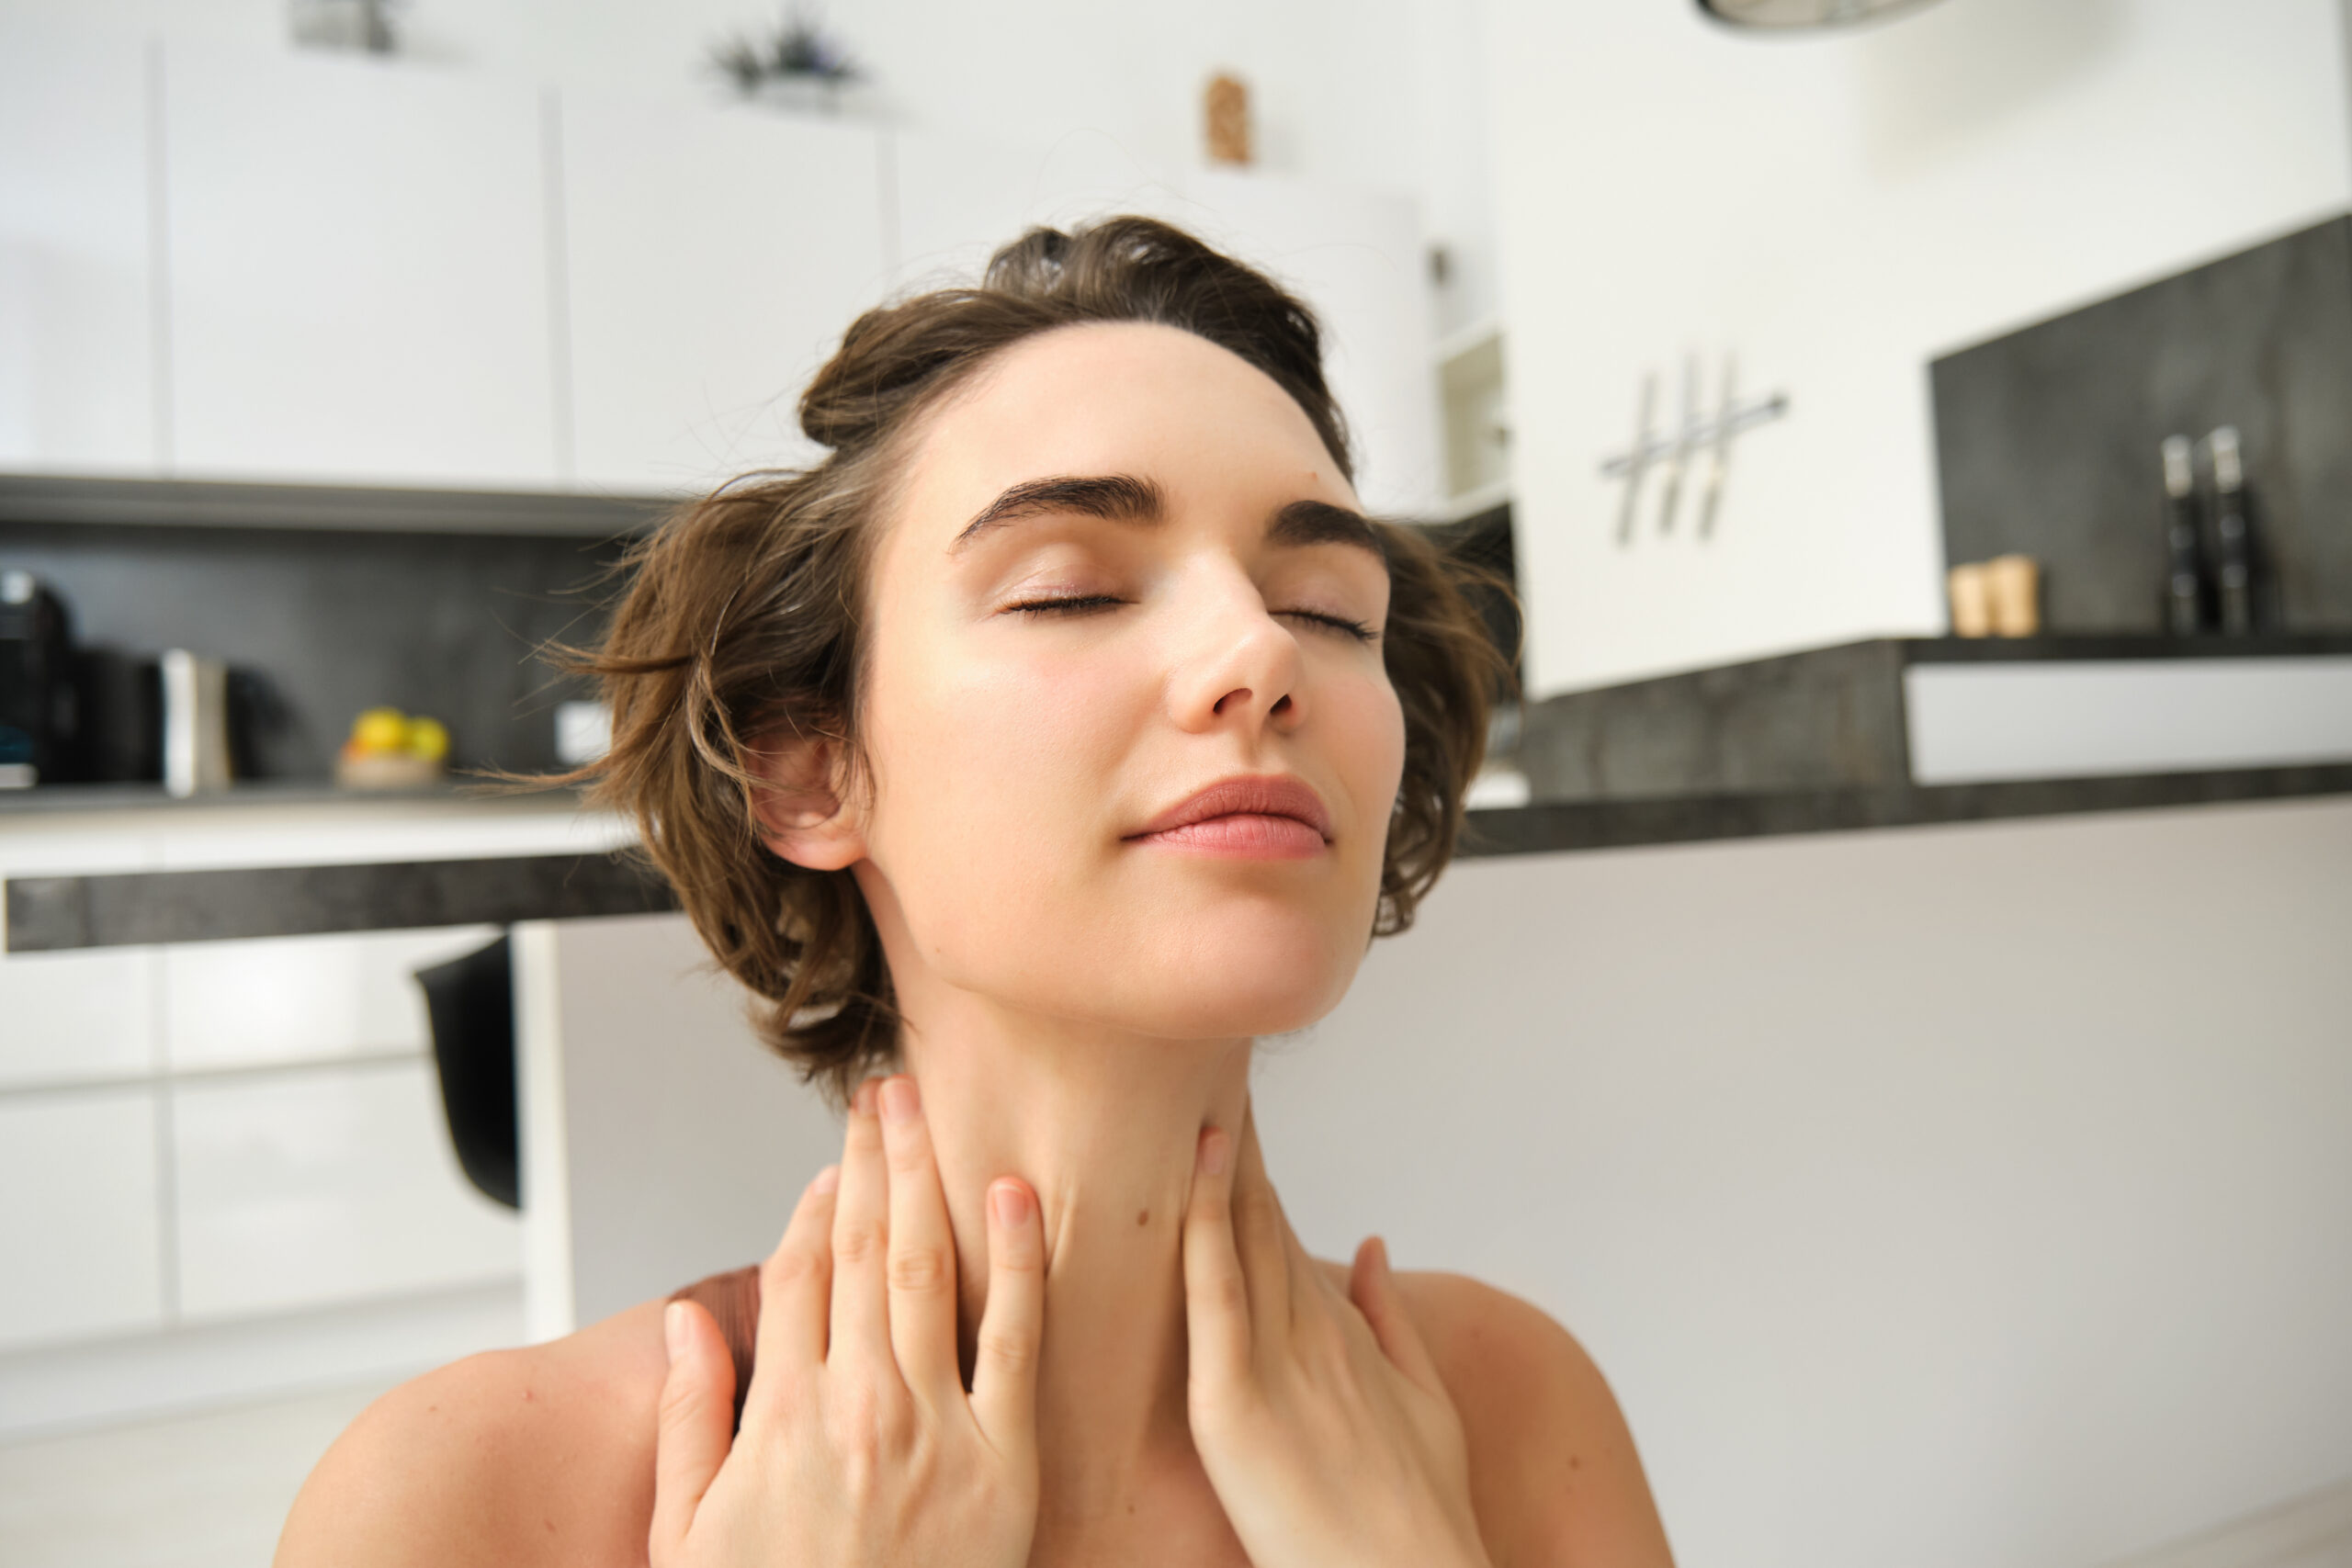 Swollen Lymph Nodes: What Is, Causes, Symptoms, and Treatment